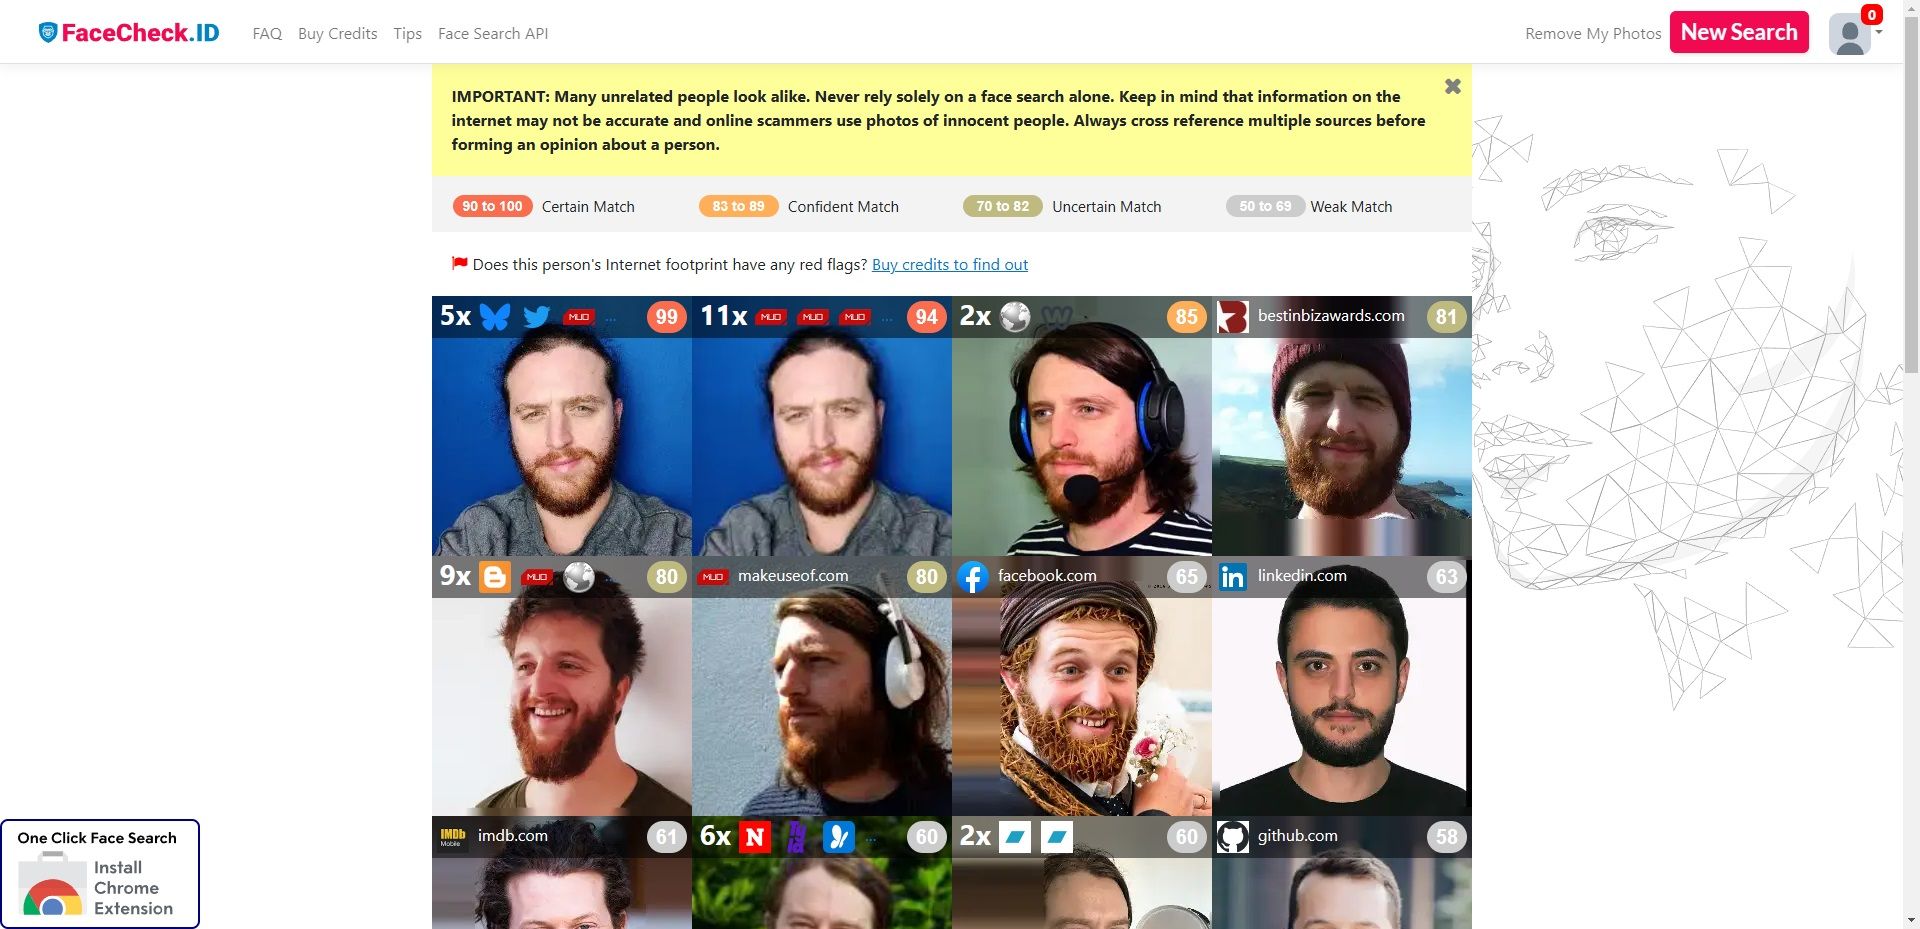 facecheck id matching face examples